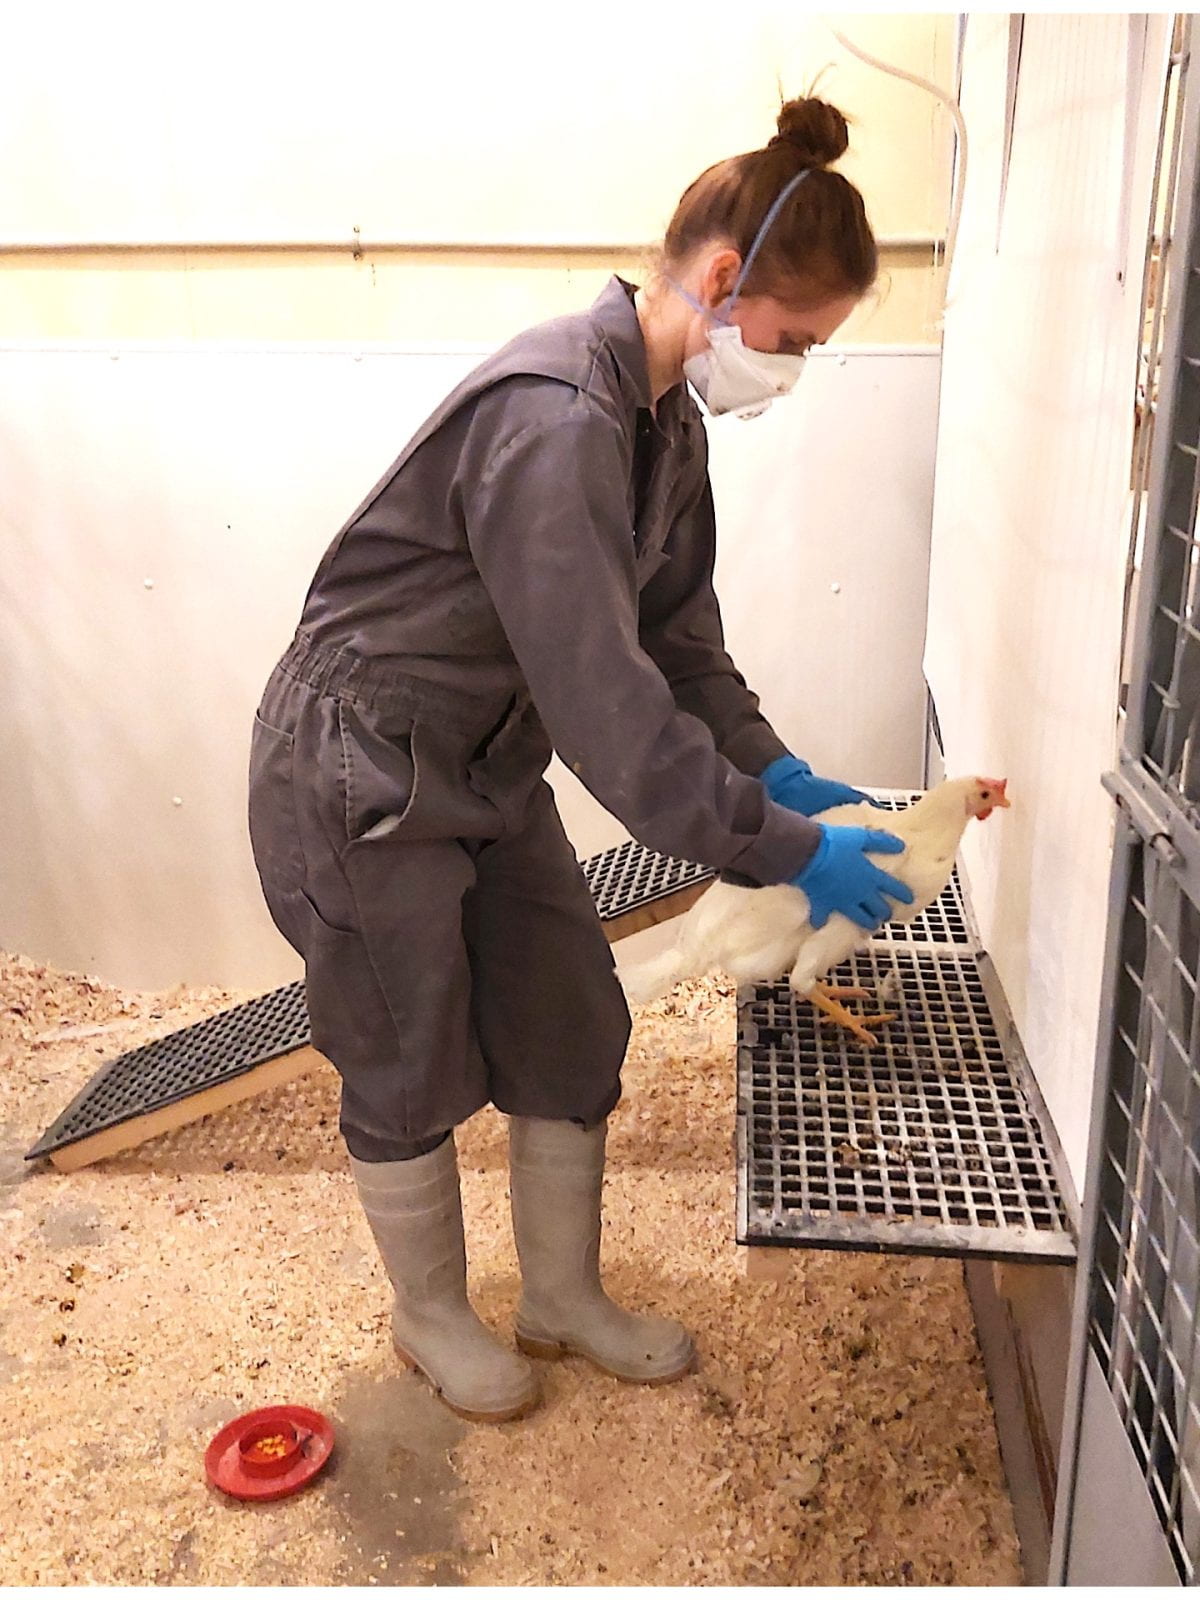 A CCSAW student lab uses inclined ramps to assess mobility in chickens differing in foot health